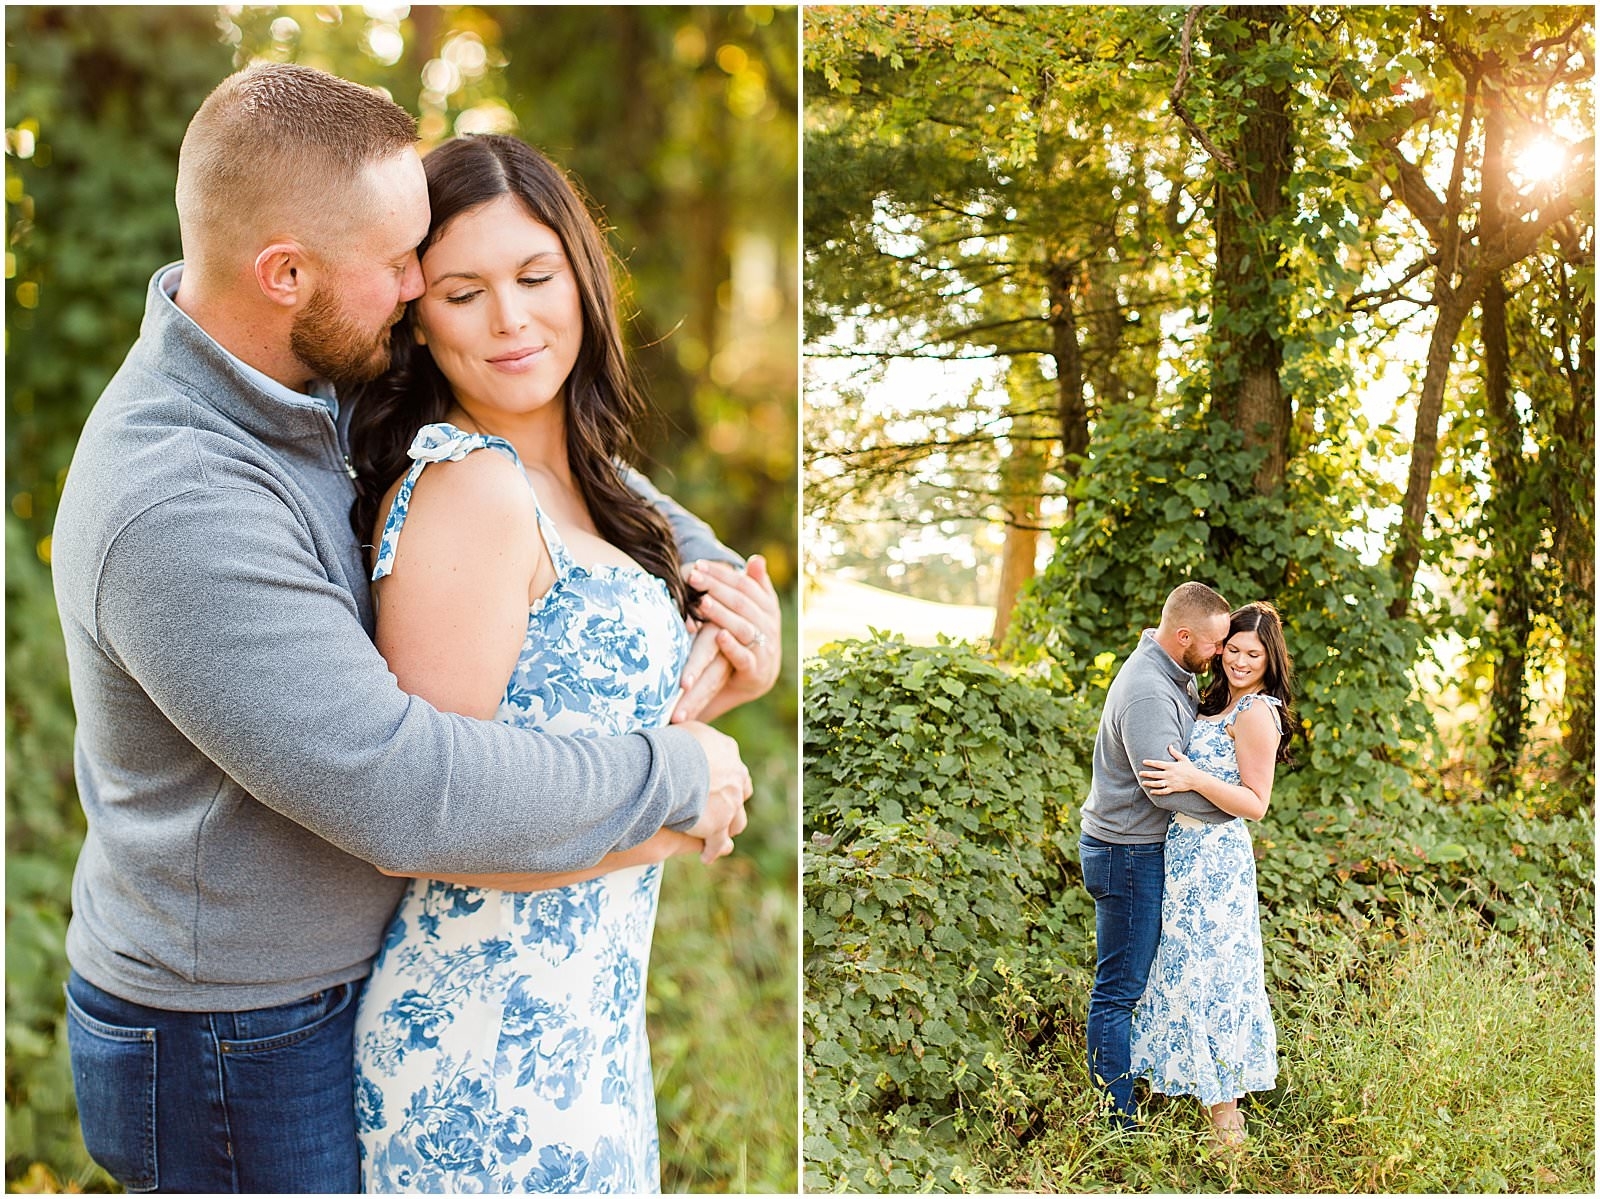 The Best of Engagement Sessions 2020 Recap0023.jpg